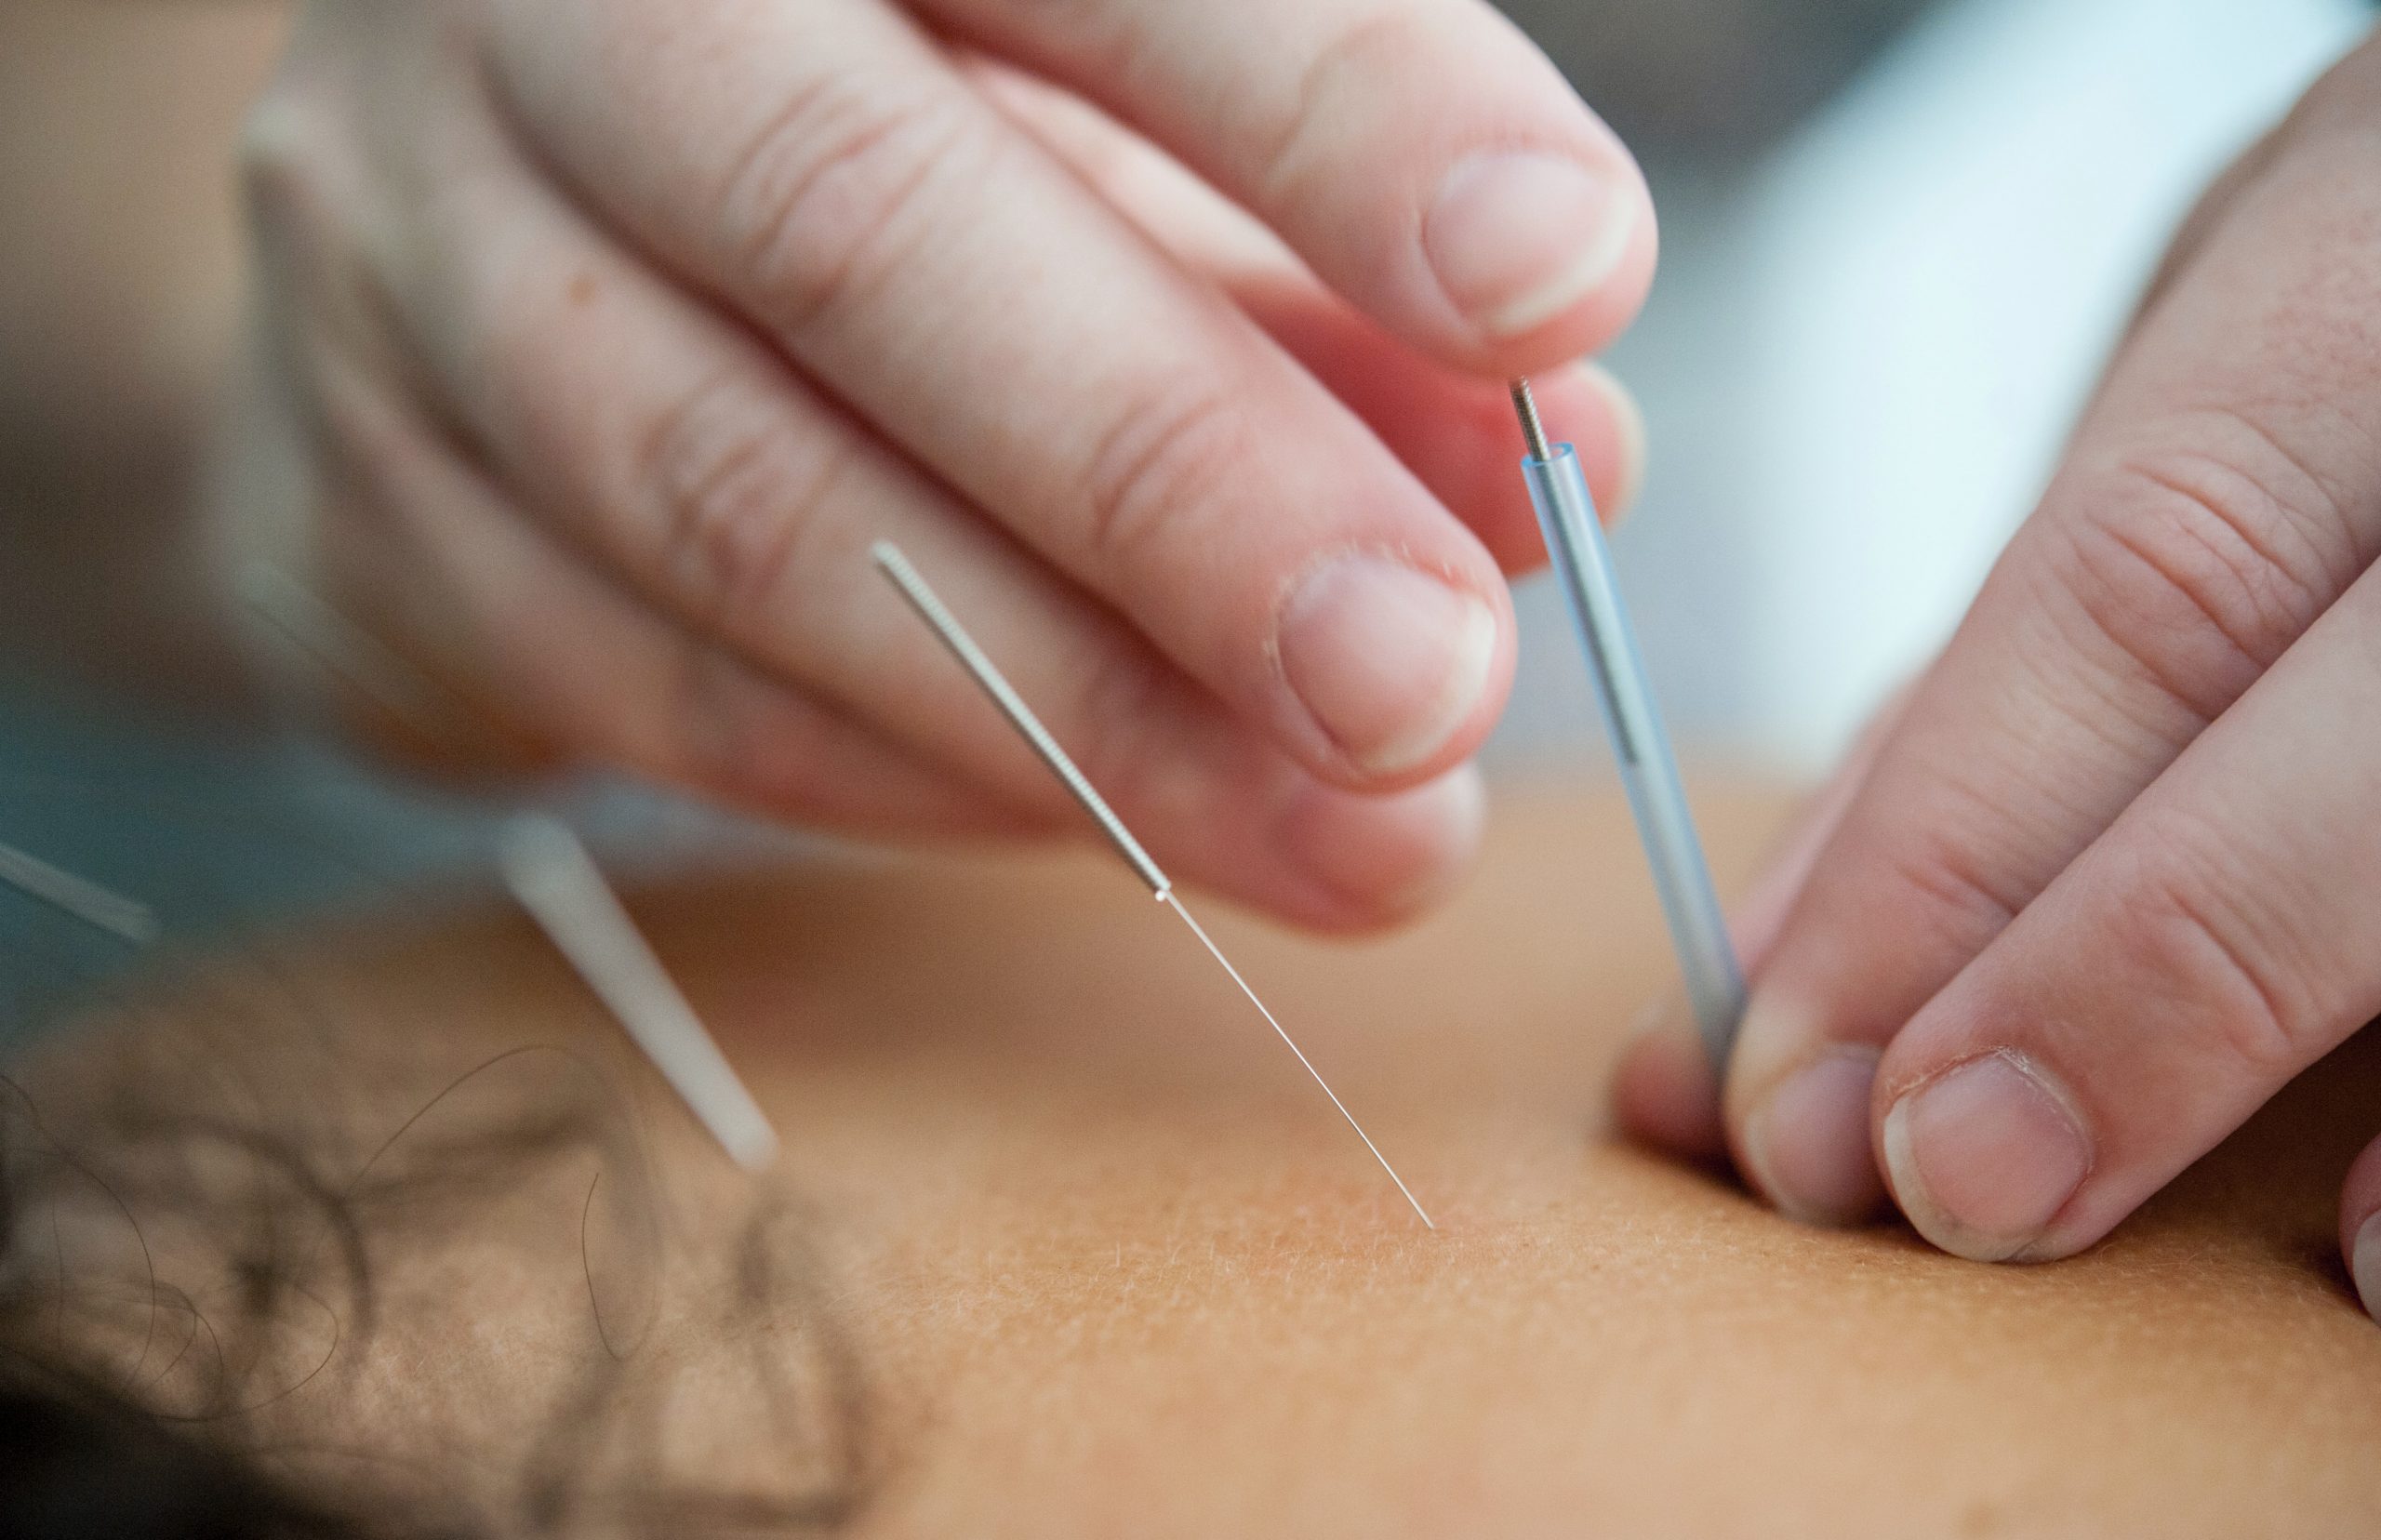 Other Acupuncture And Substitute Medicine Centers In Higher London